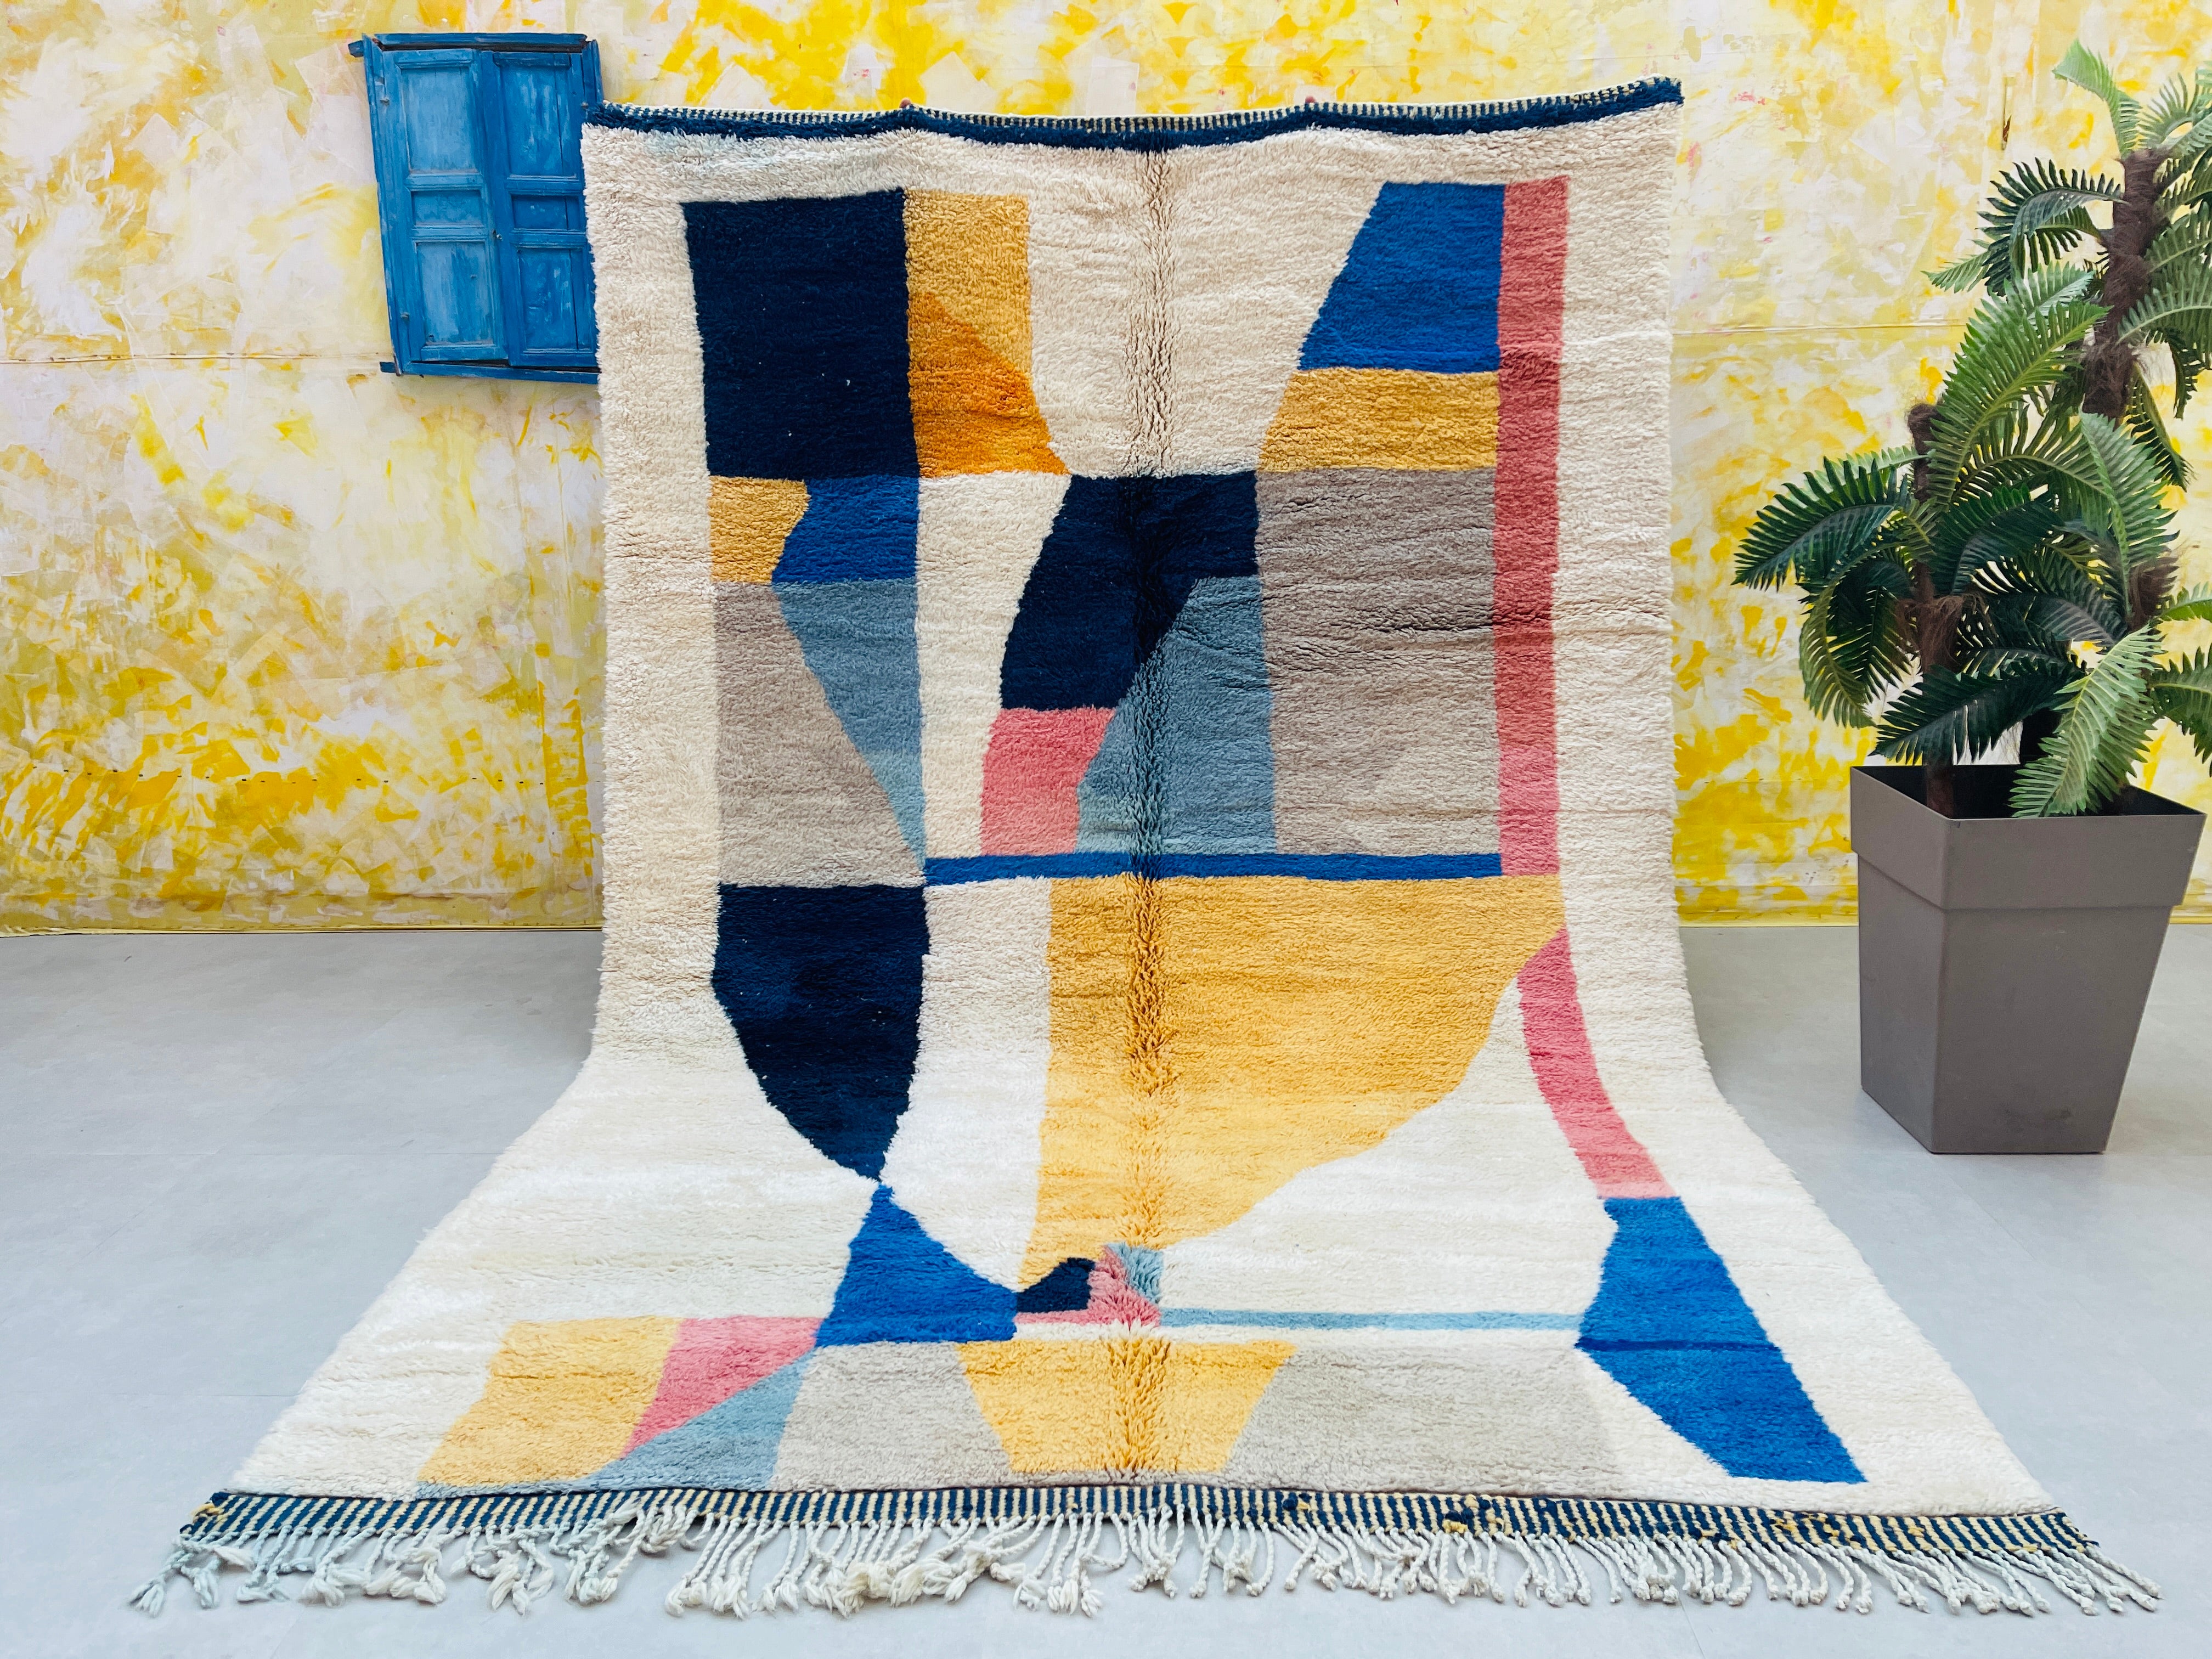 Moroccan Rugs of the wool rugs